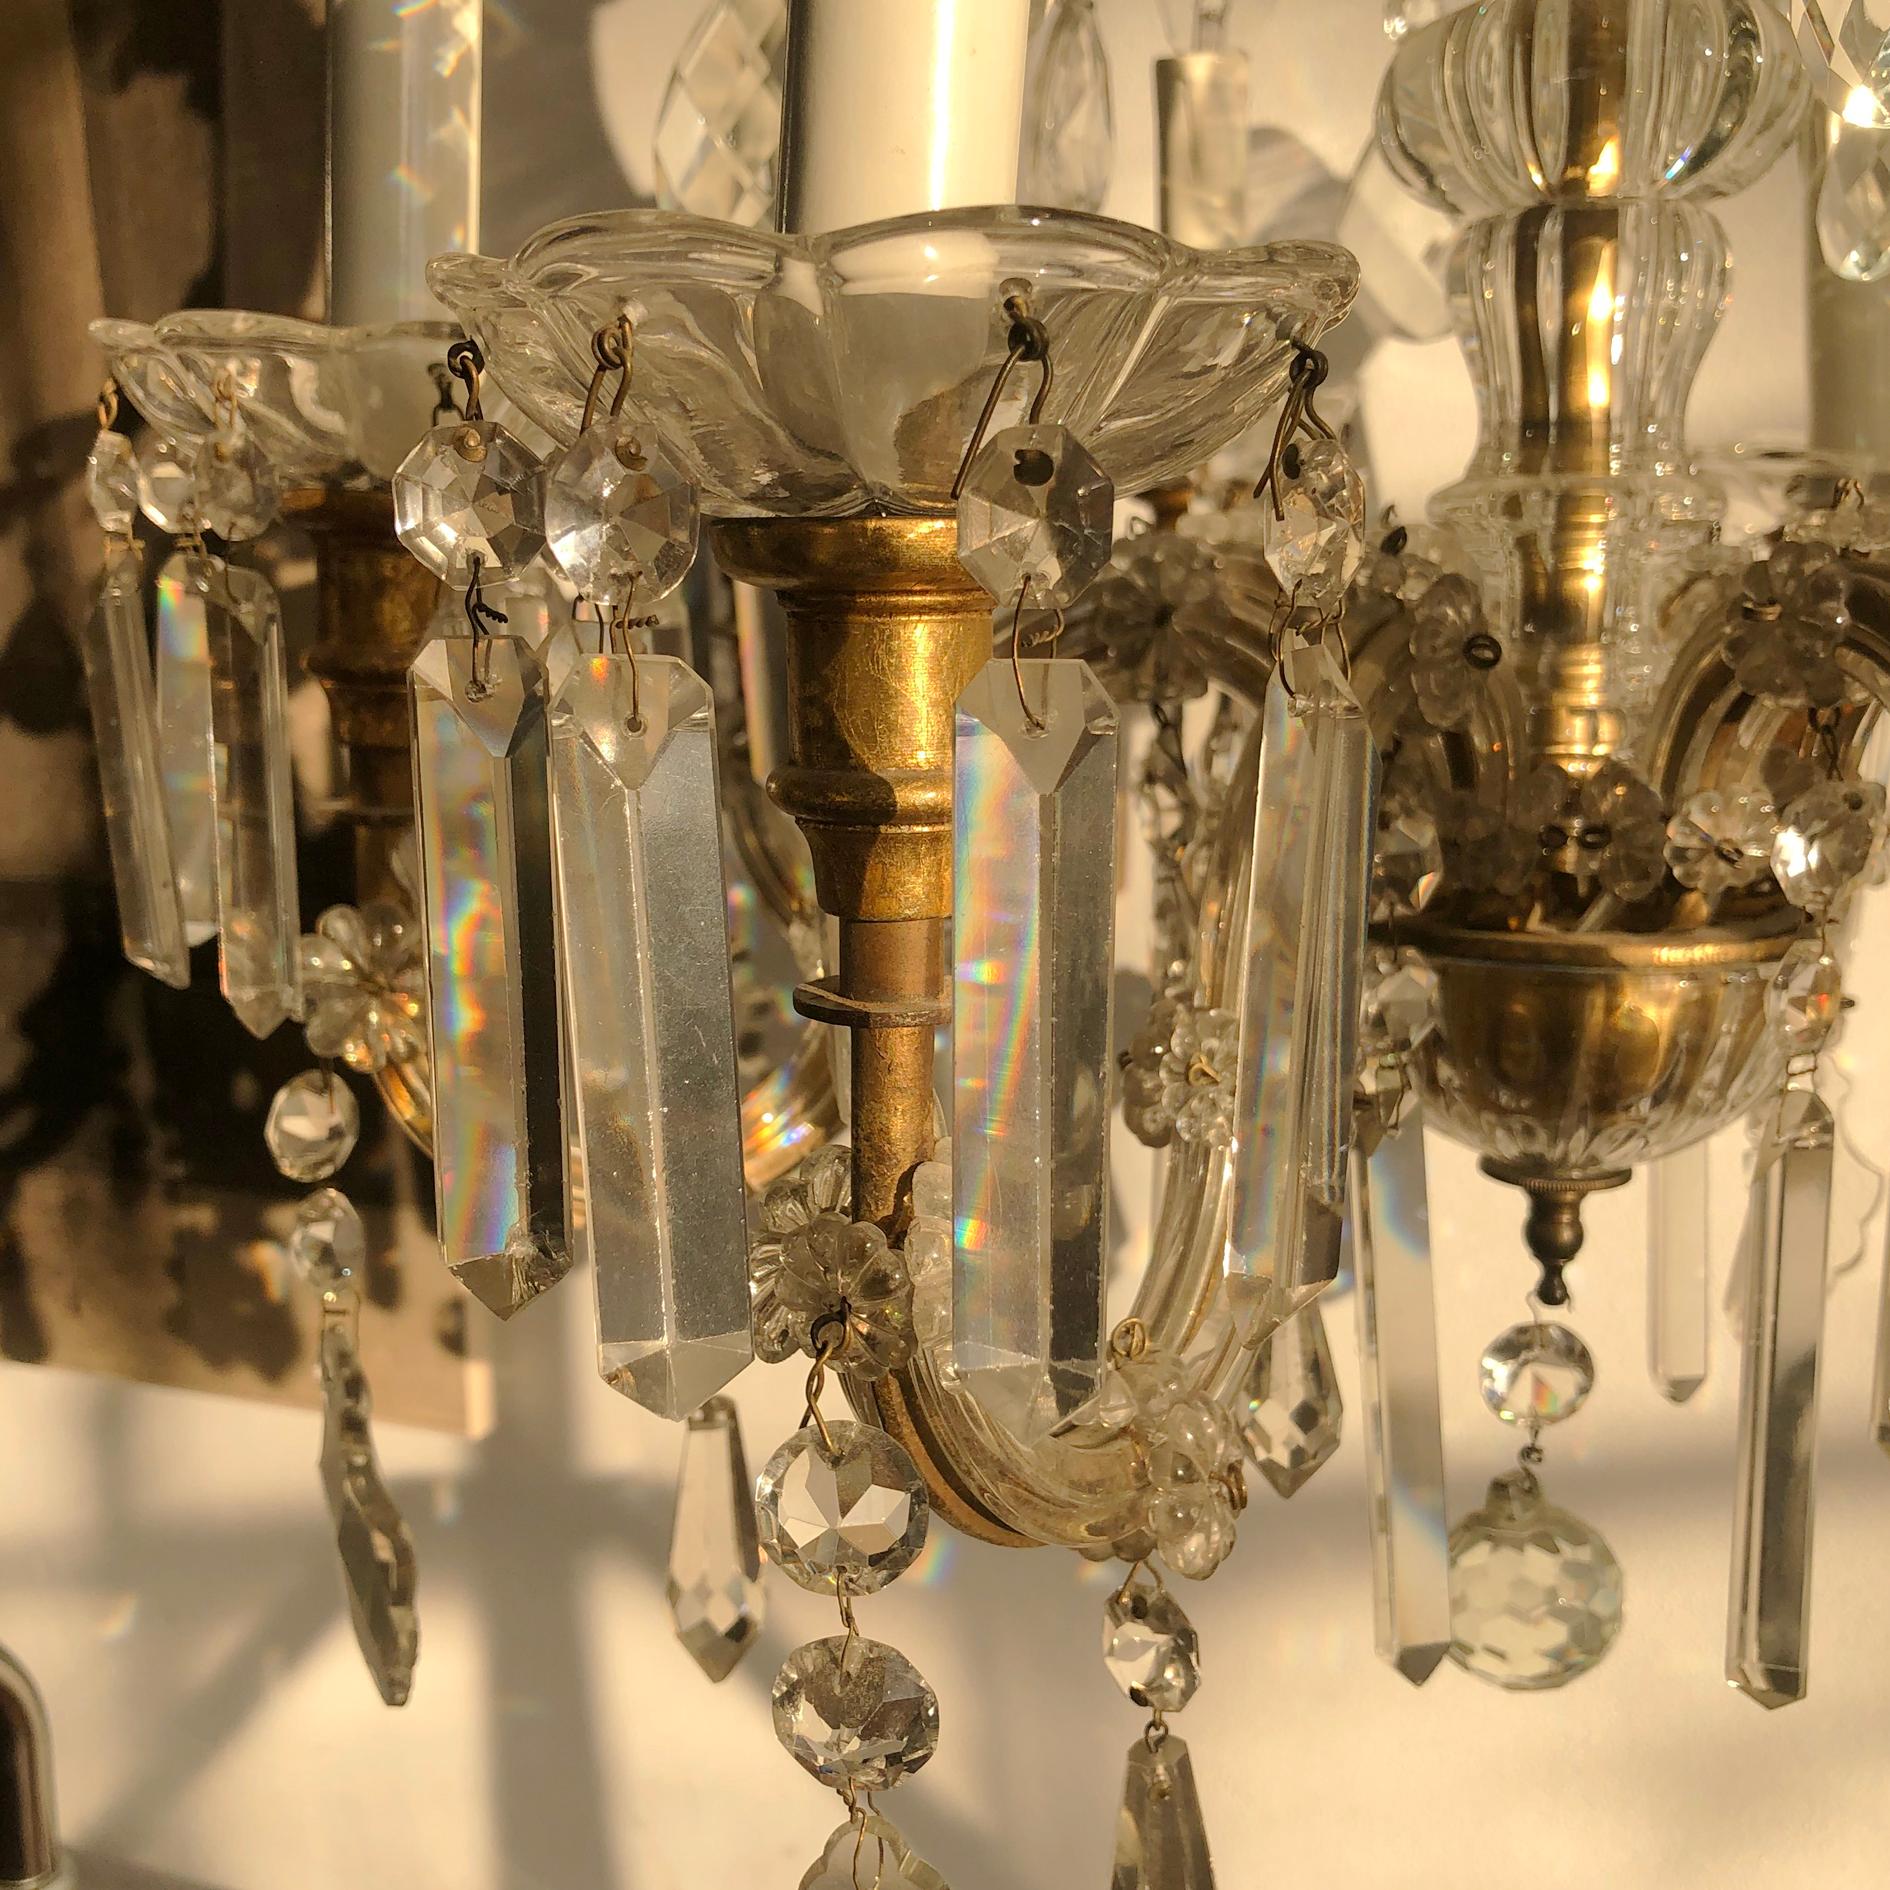 Eight Arm Maria Theresa Crystal Chandelier, Hungary or Austria, 1900s For Sale 3